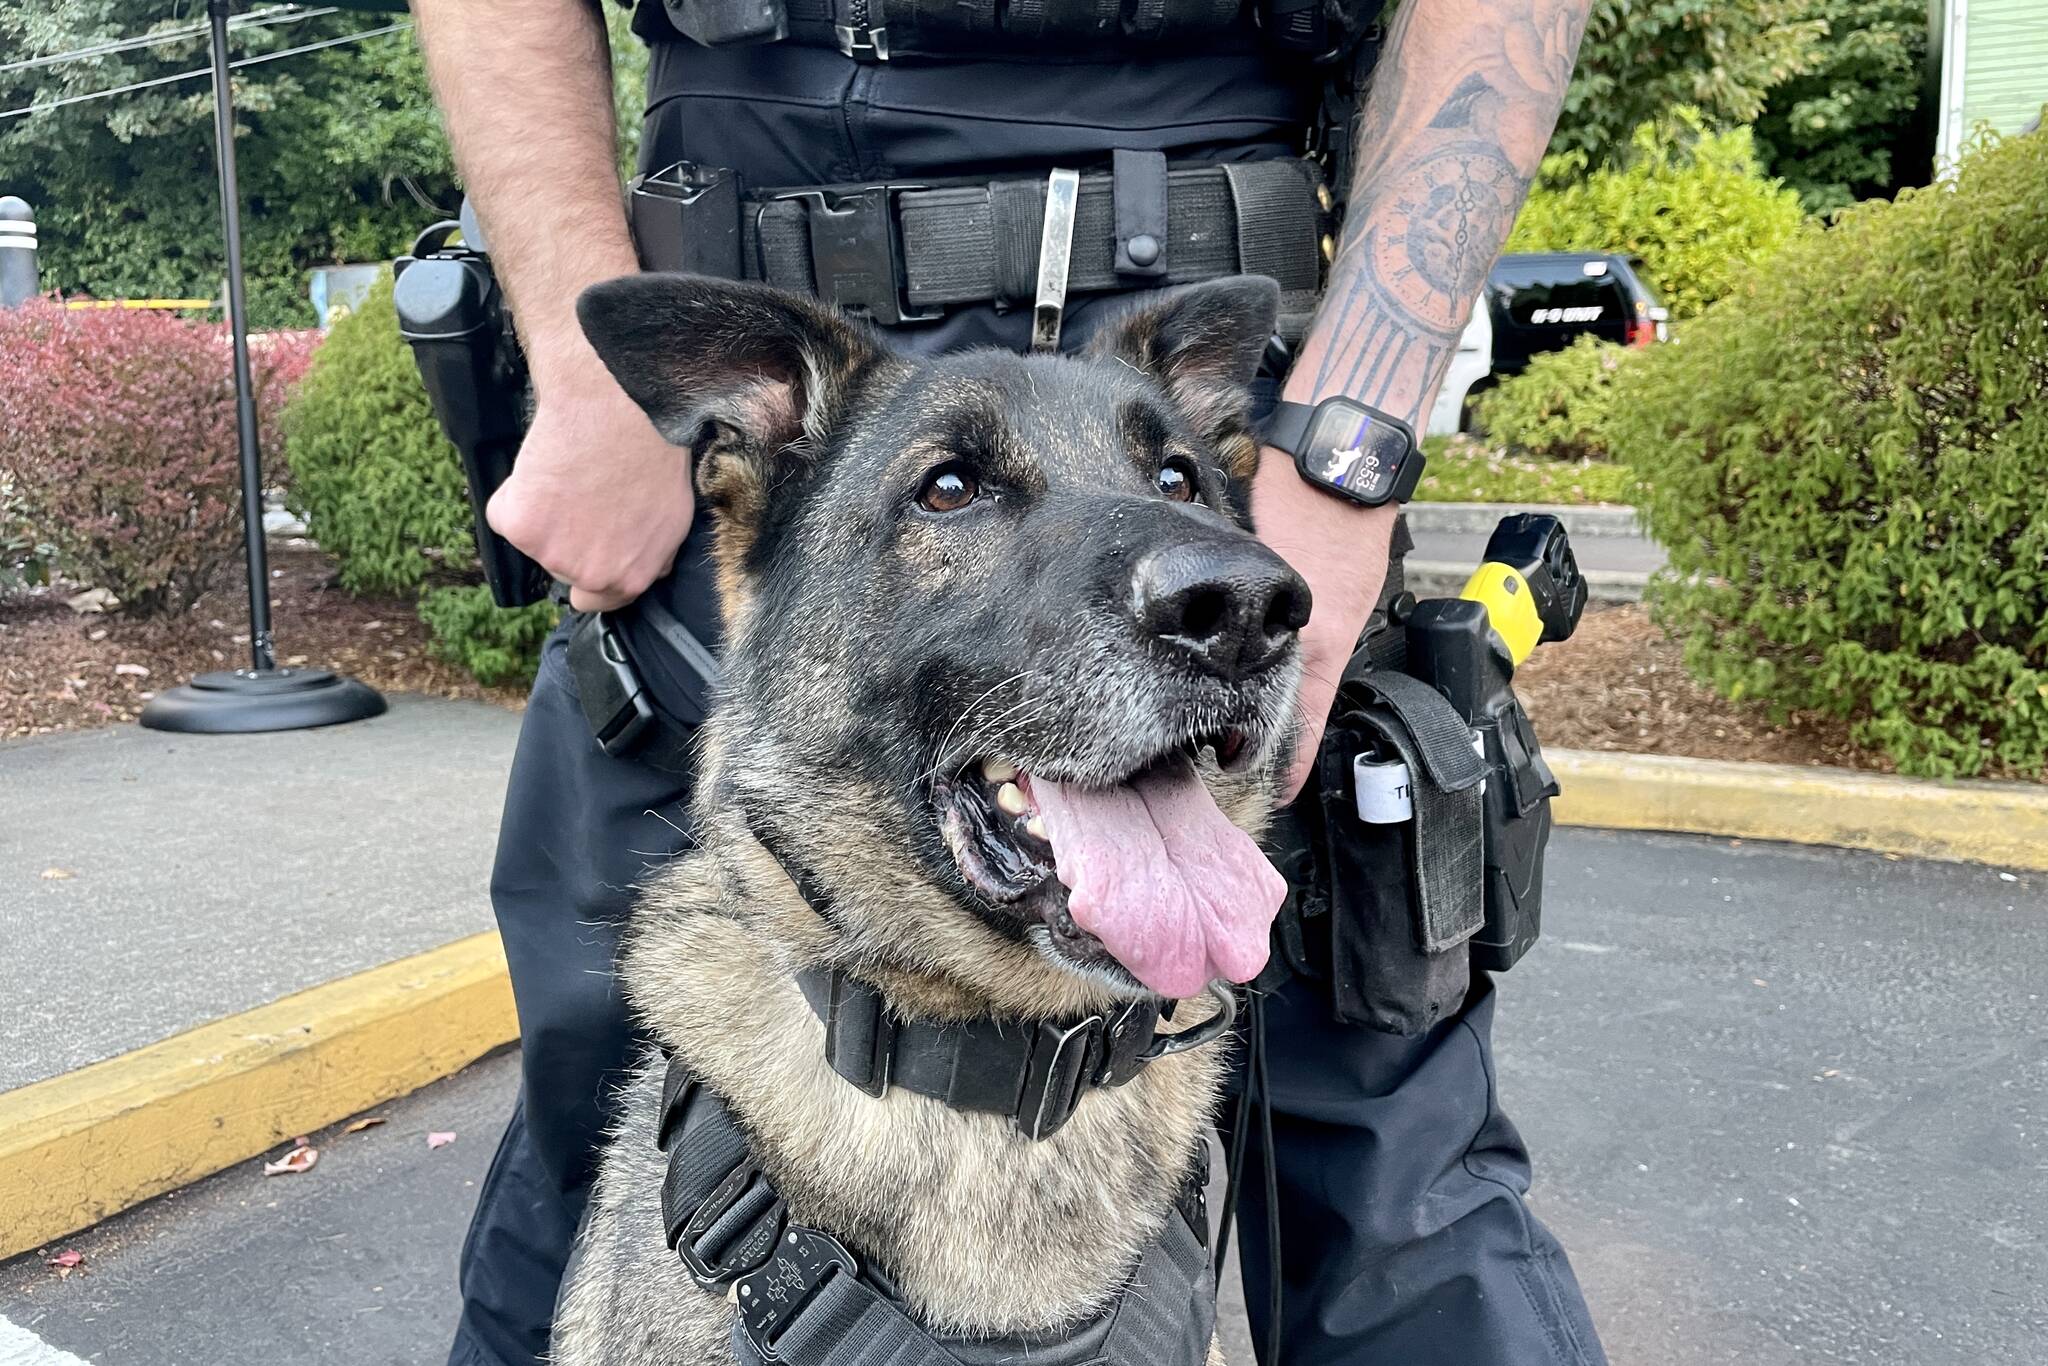 Aberdeen Police Department apprehension dog Ronin thinks good boy thoughts while being held by Officer Chad Pearsall at Badges & Brews, hosted at Starbucks on Sept. 22, 2022. (Michael S. Lockett / The Daily World)